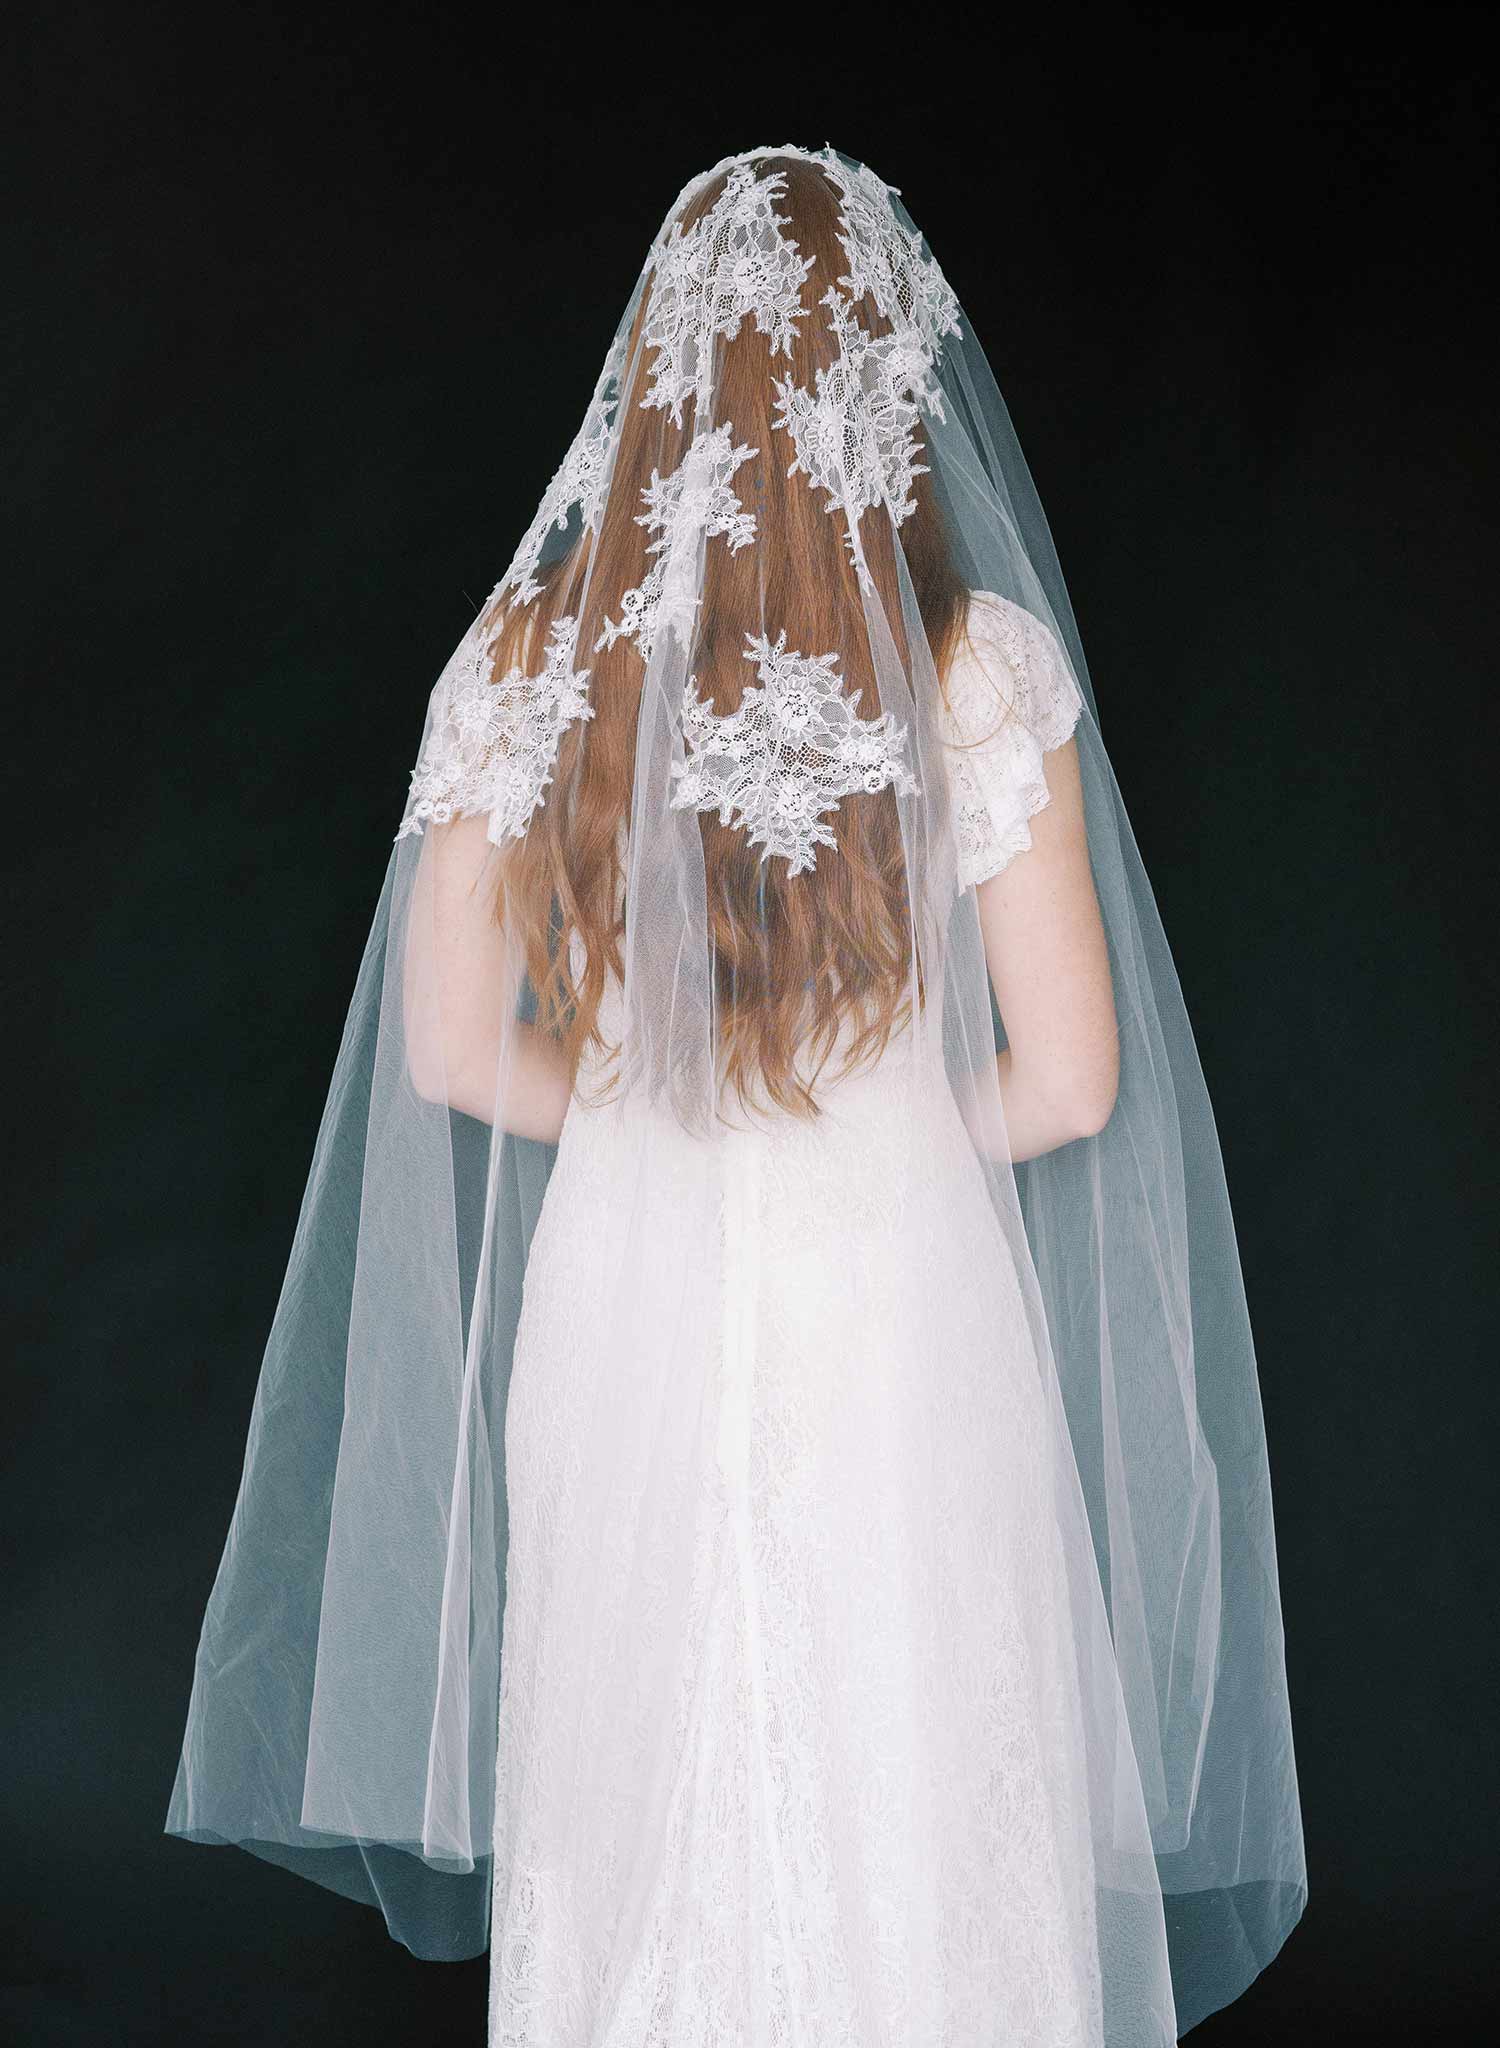 Beaded Floral Cathedral Veil wtih Scallop Edge